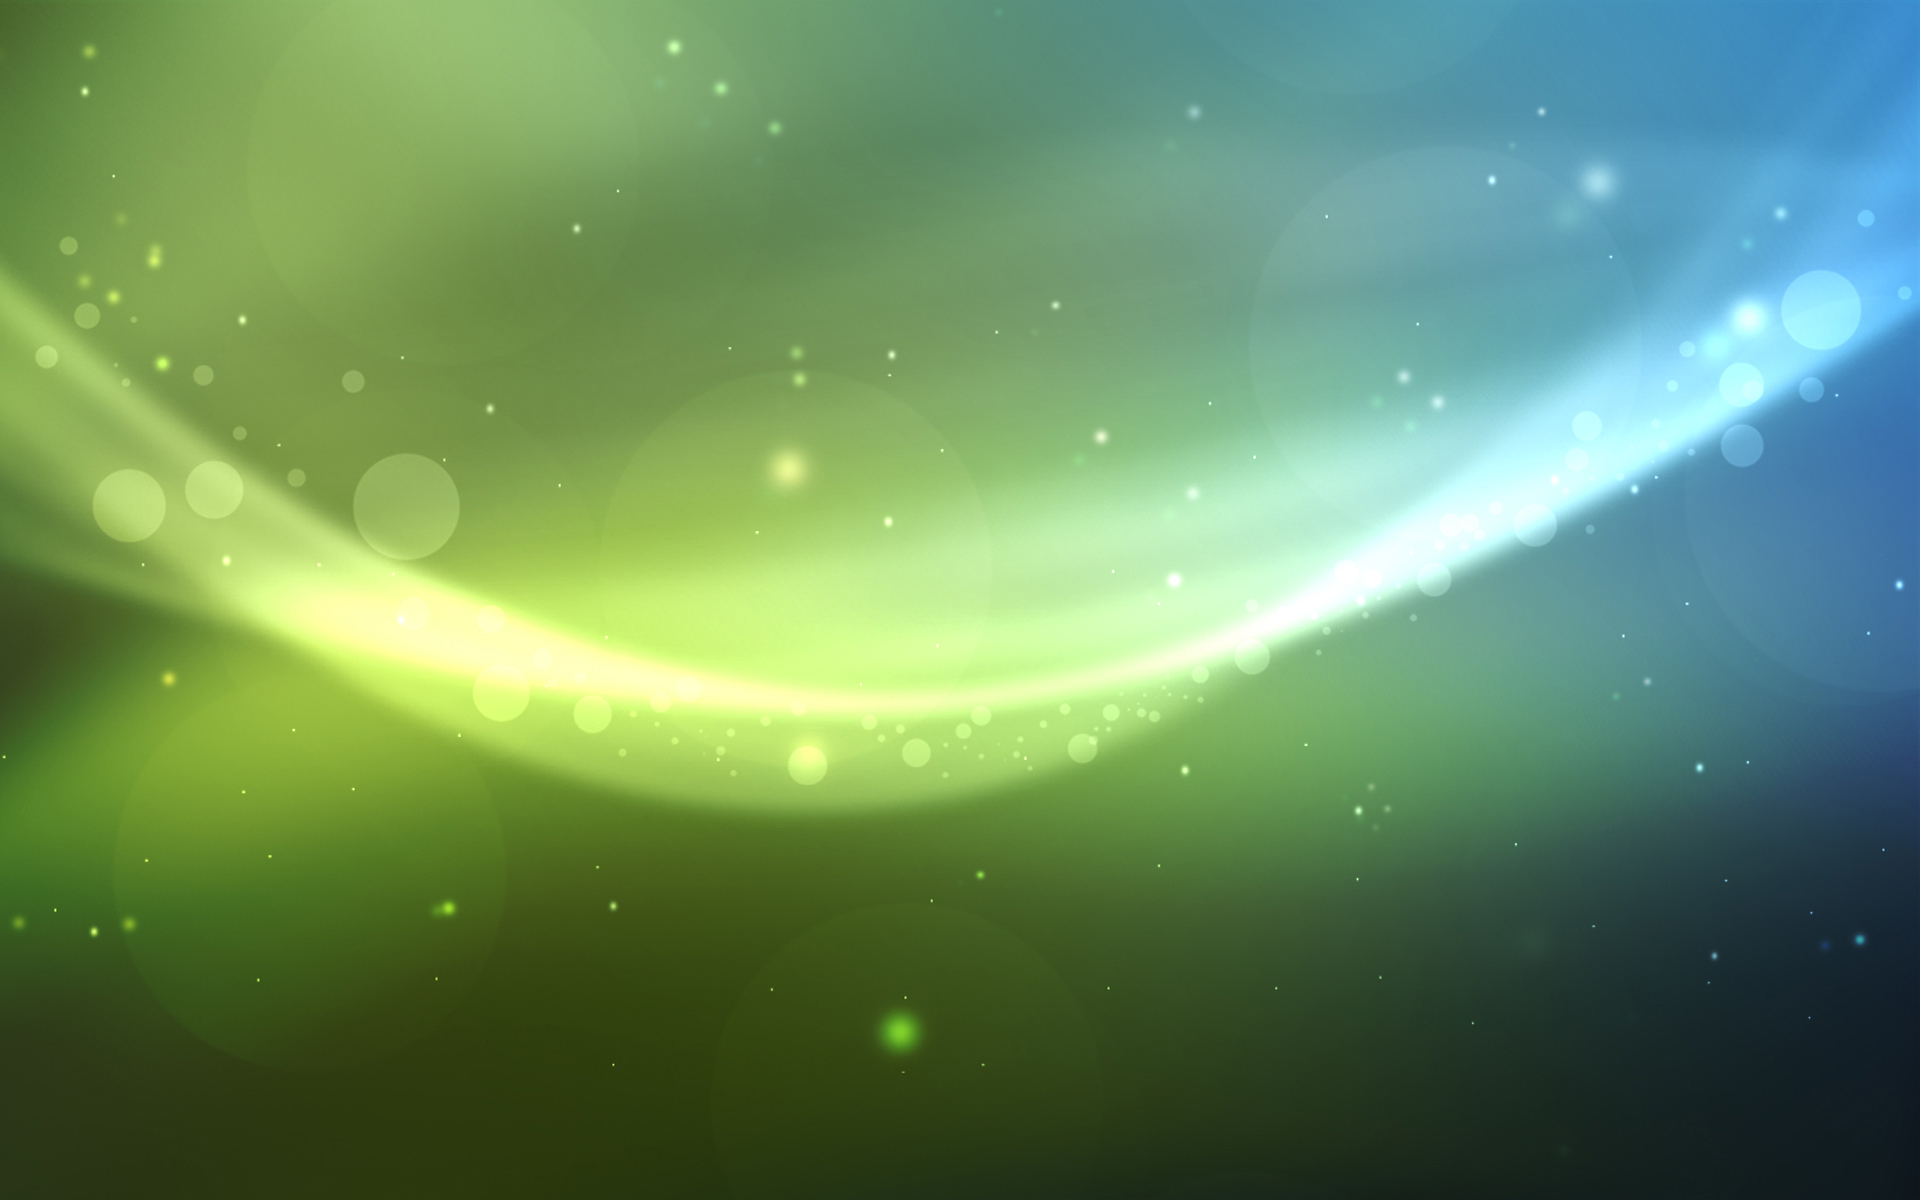 Bright Star wallpaper colorful desktop background Abstract